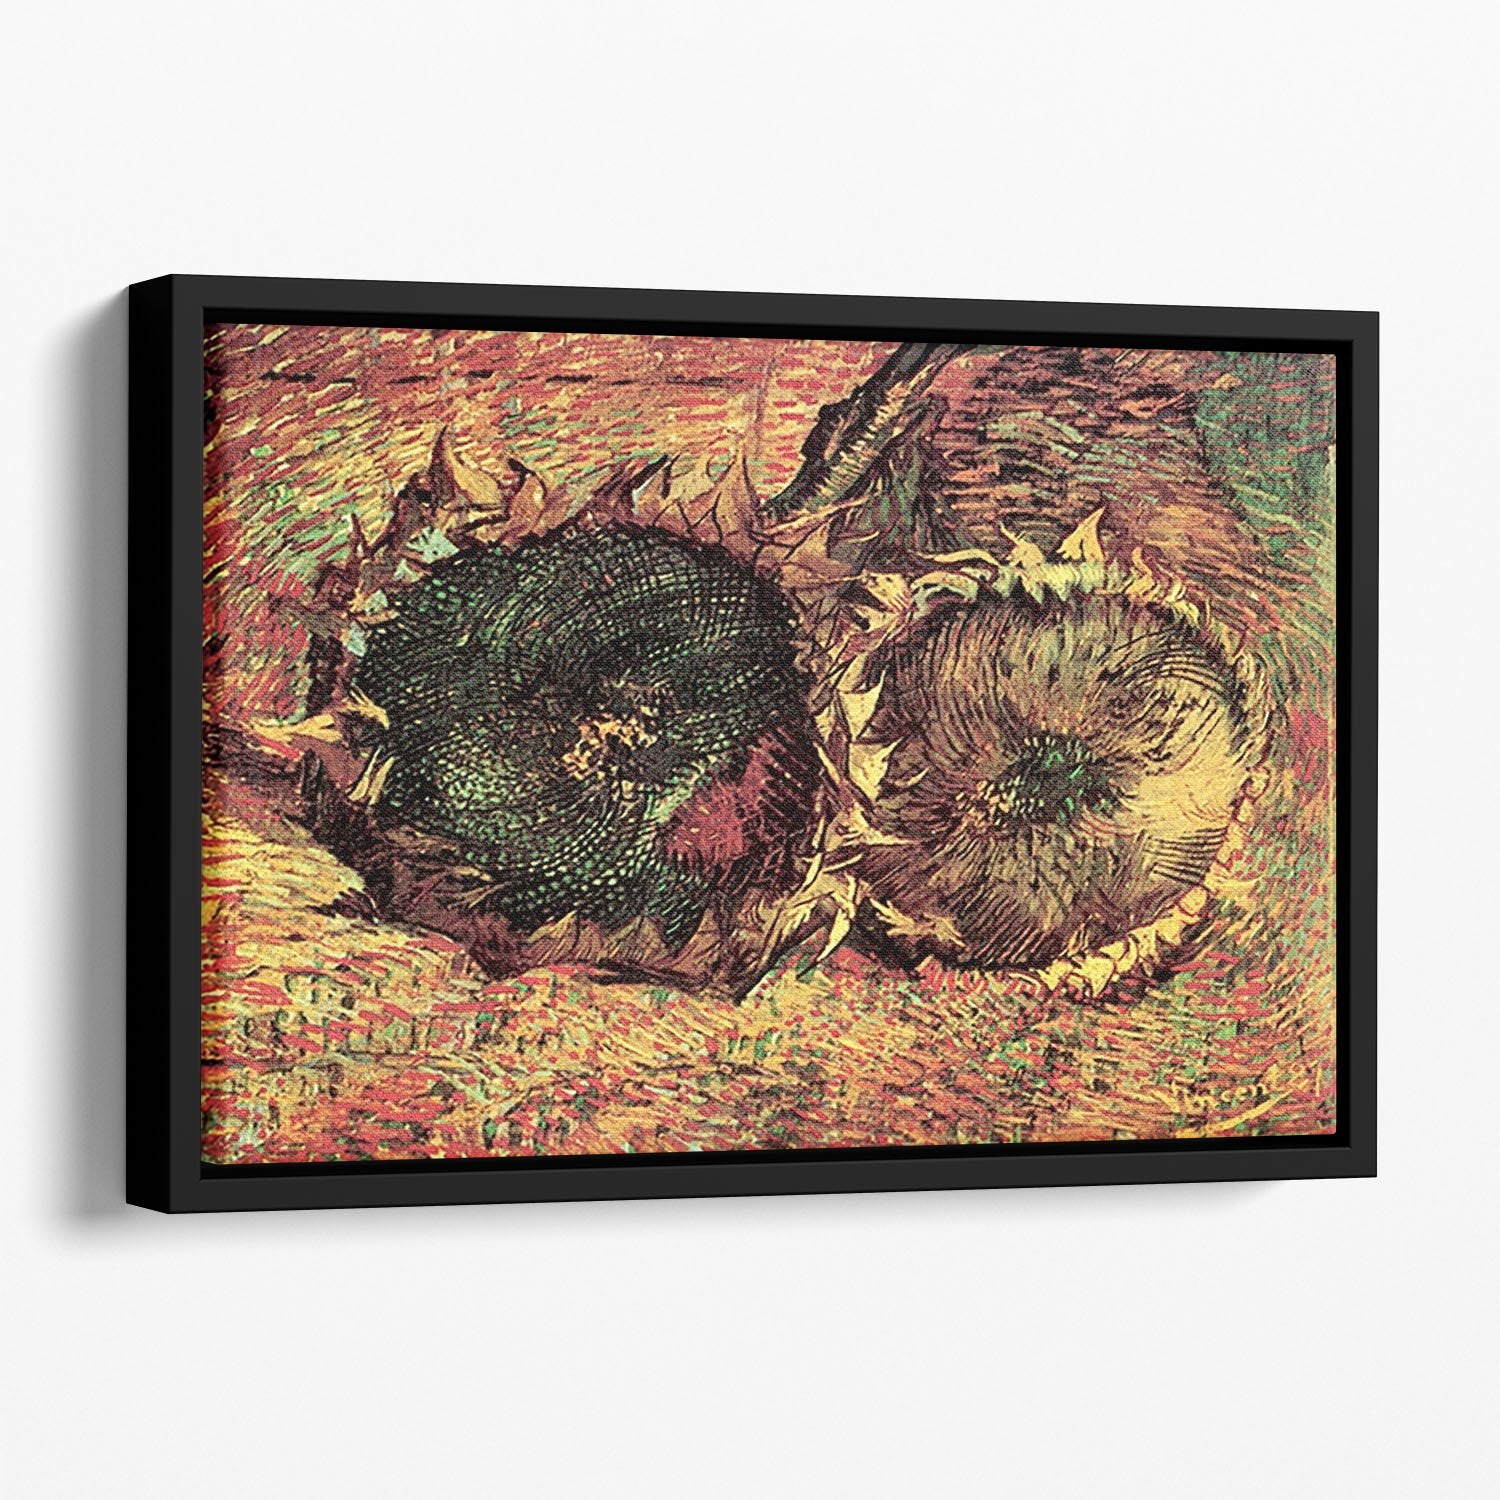 Two Cut Sunflowers 2 by Van Gogh Floating Framed Canvas